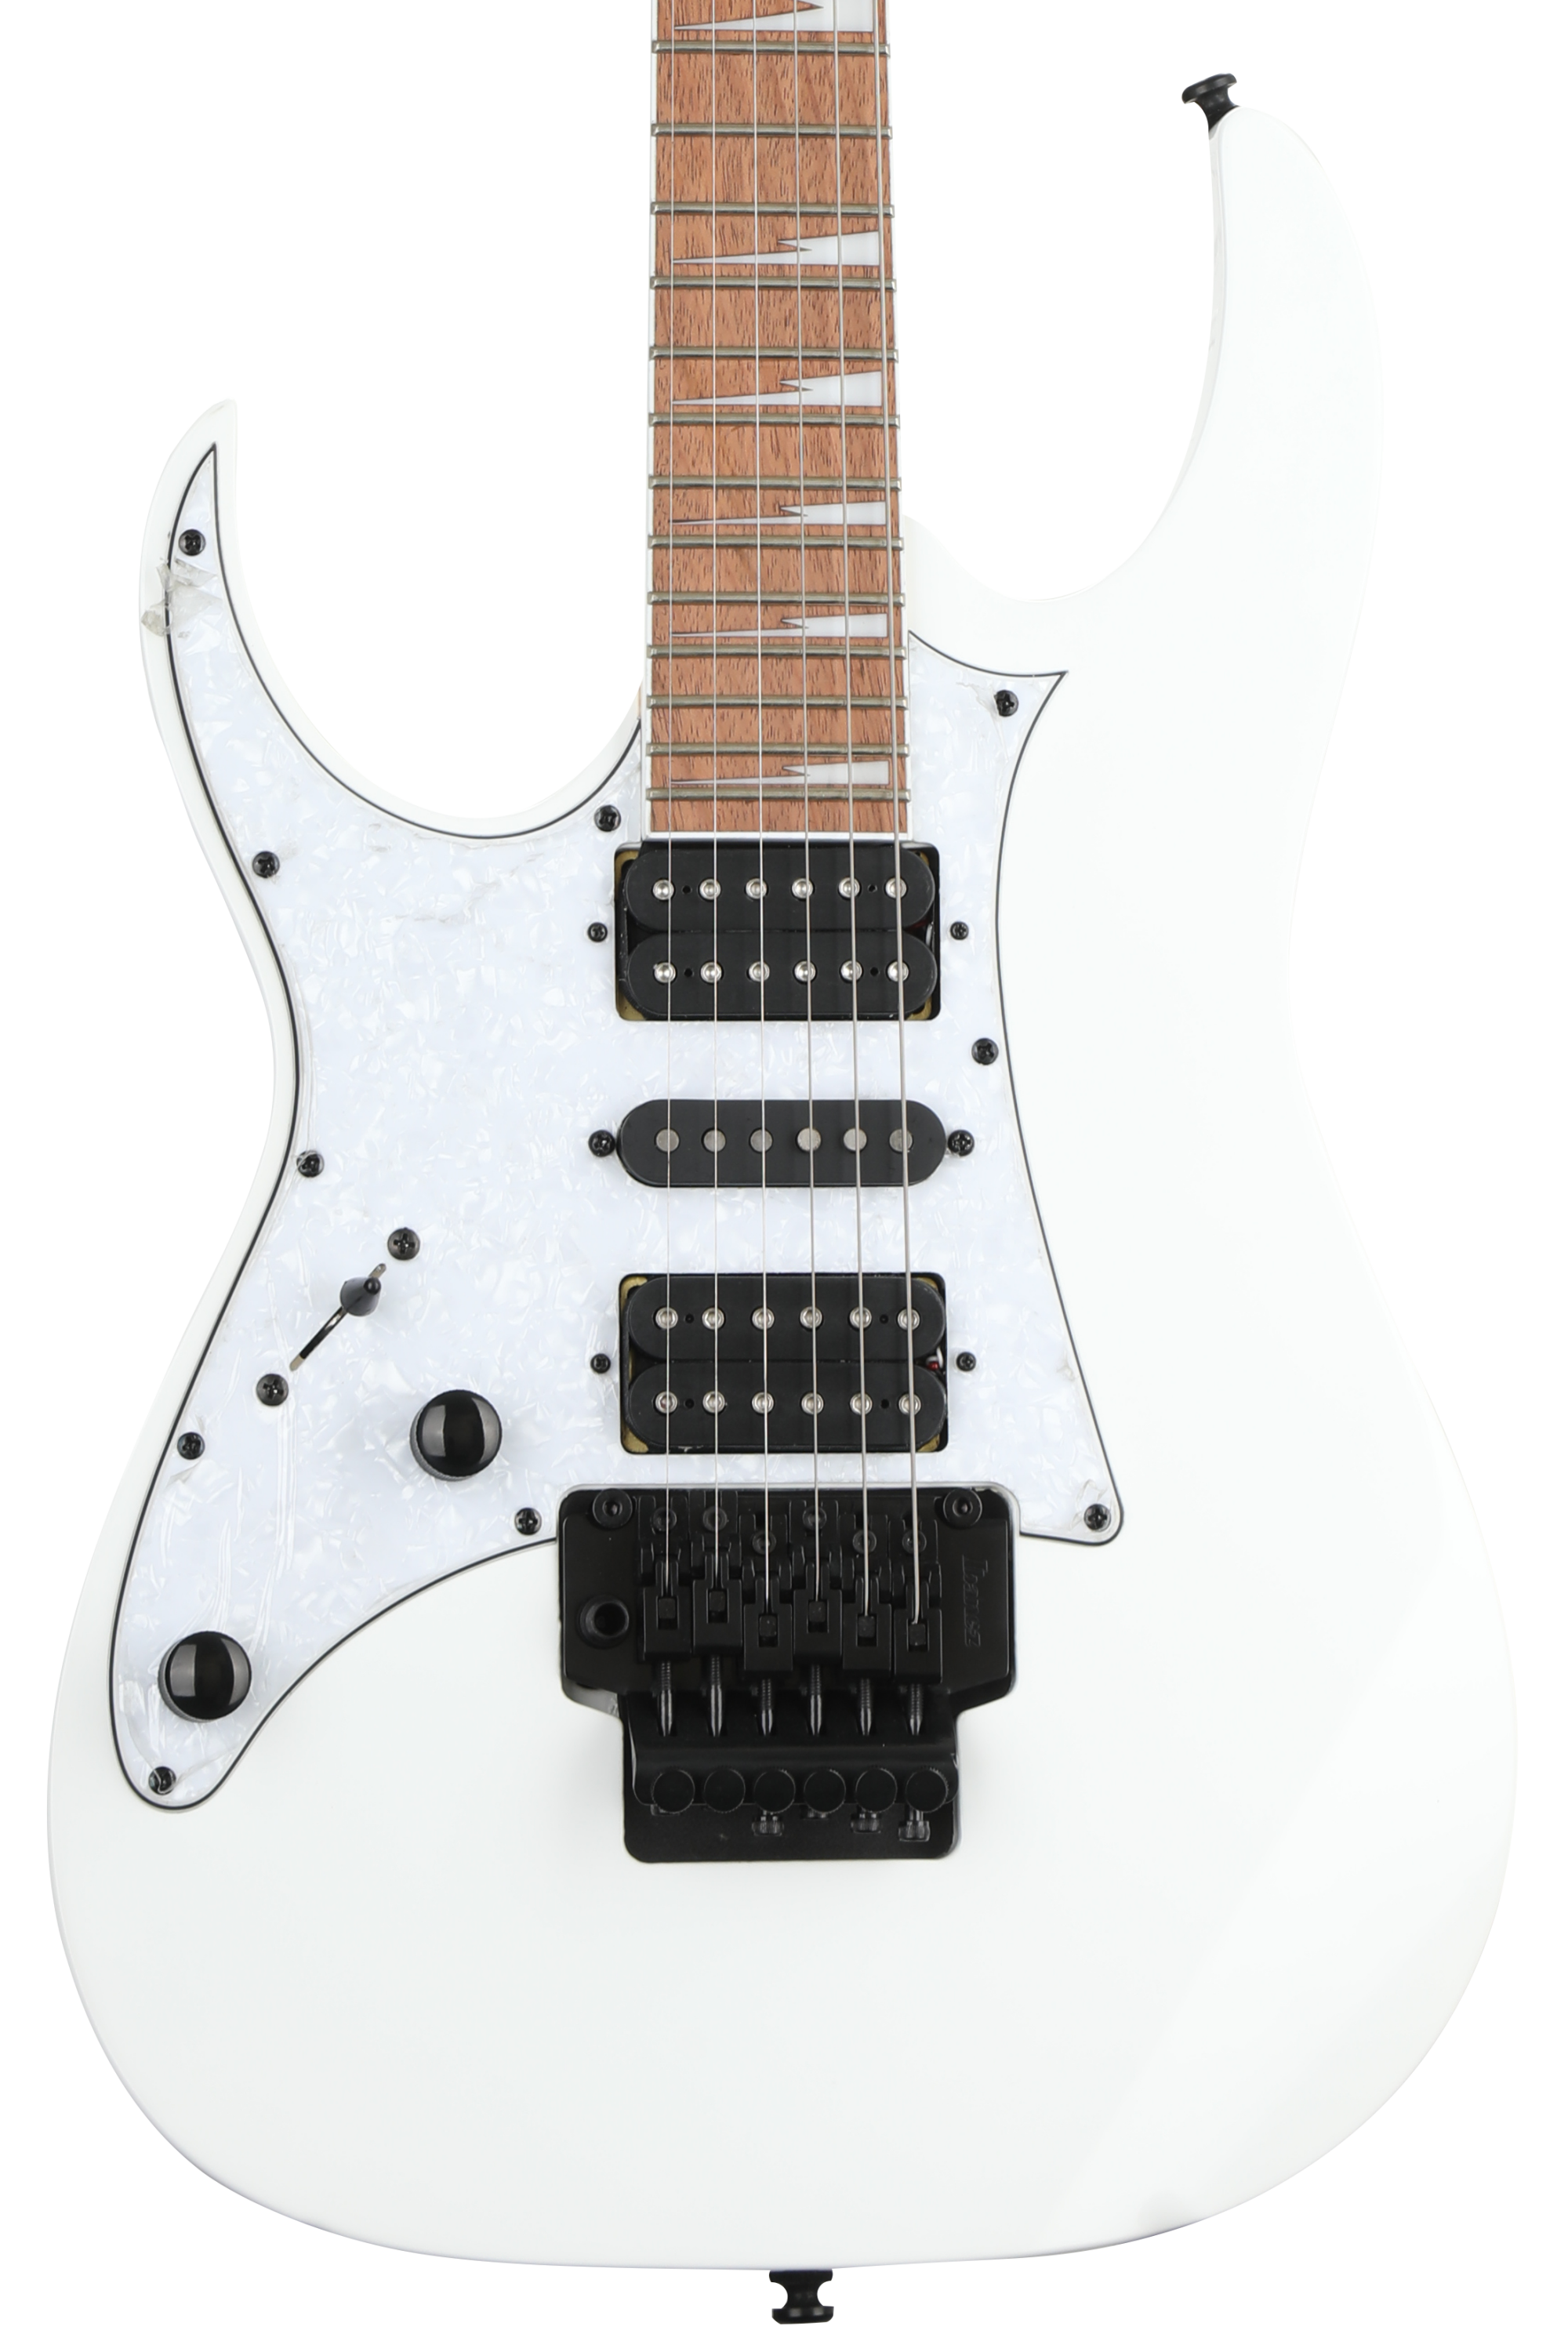 Ibanez RG Standard RG450DXBL Left-handed Electric Guitar - White